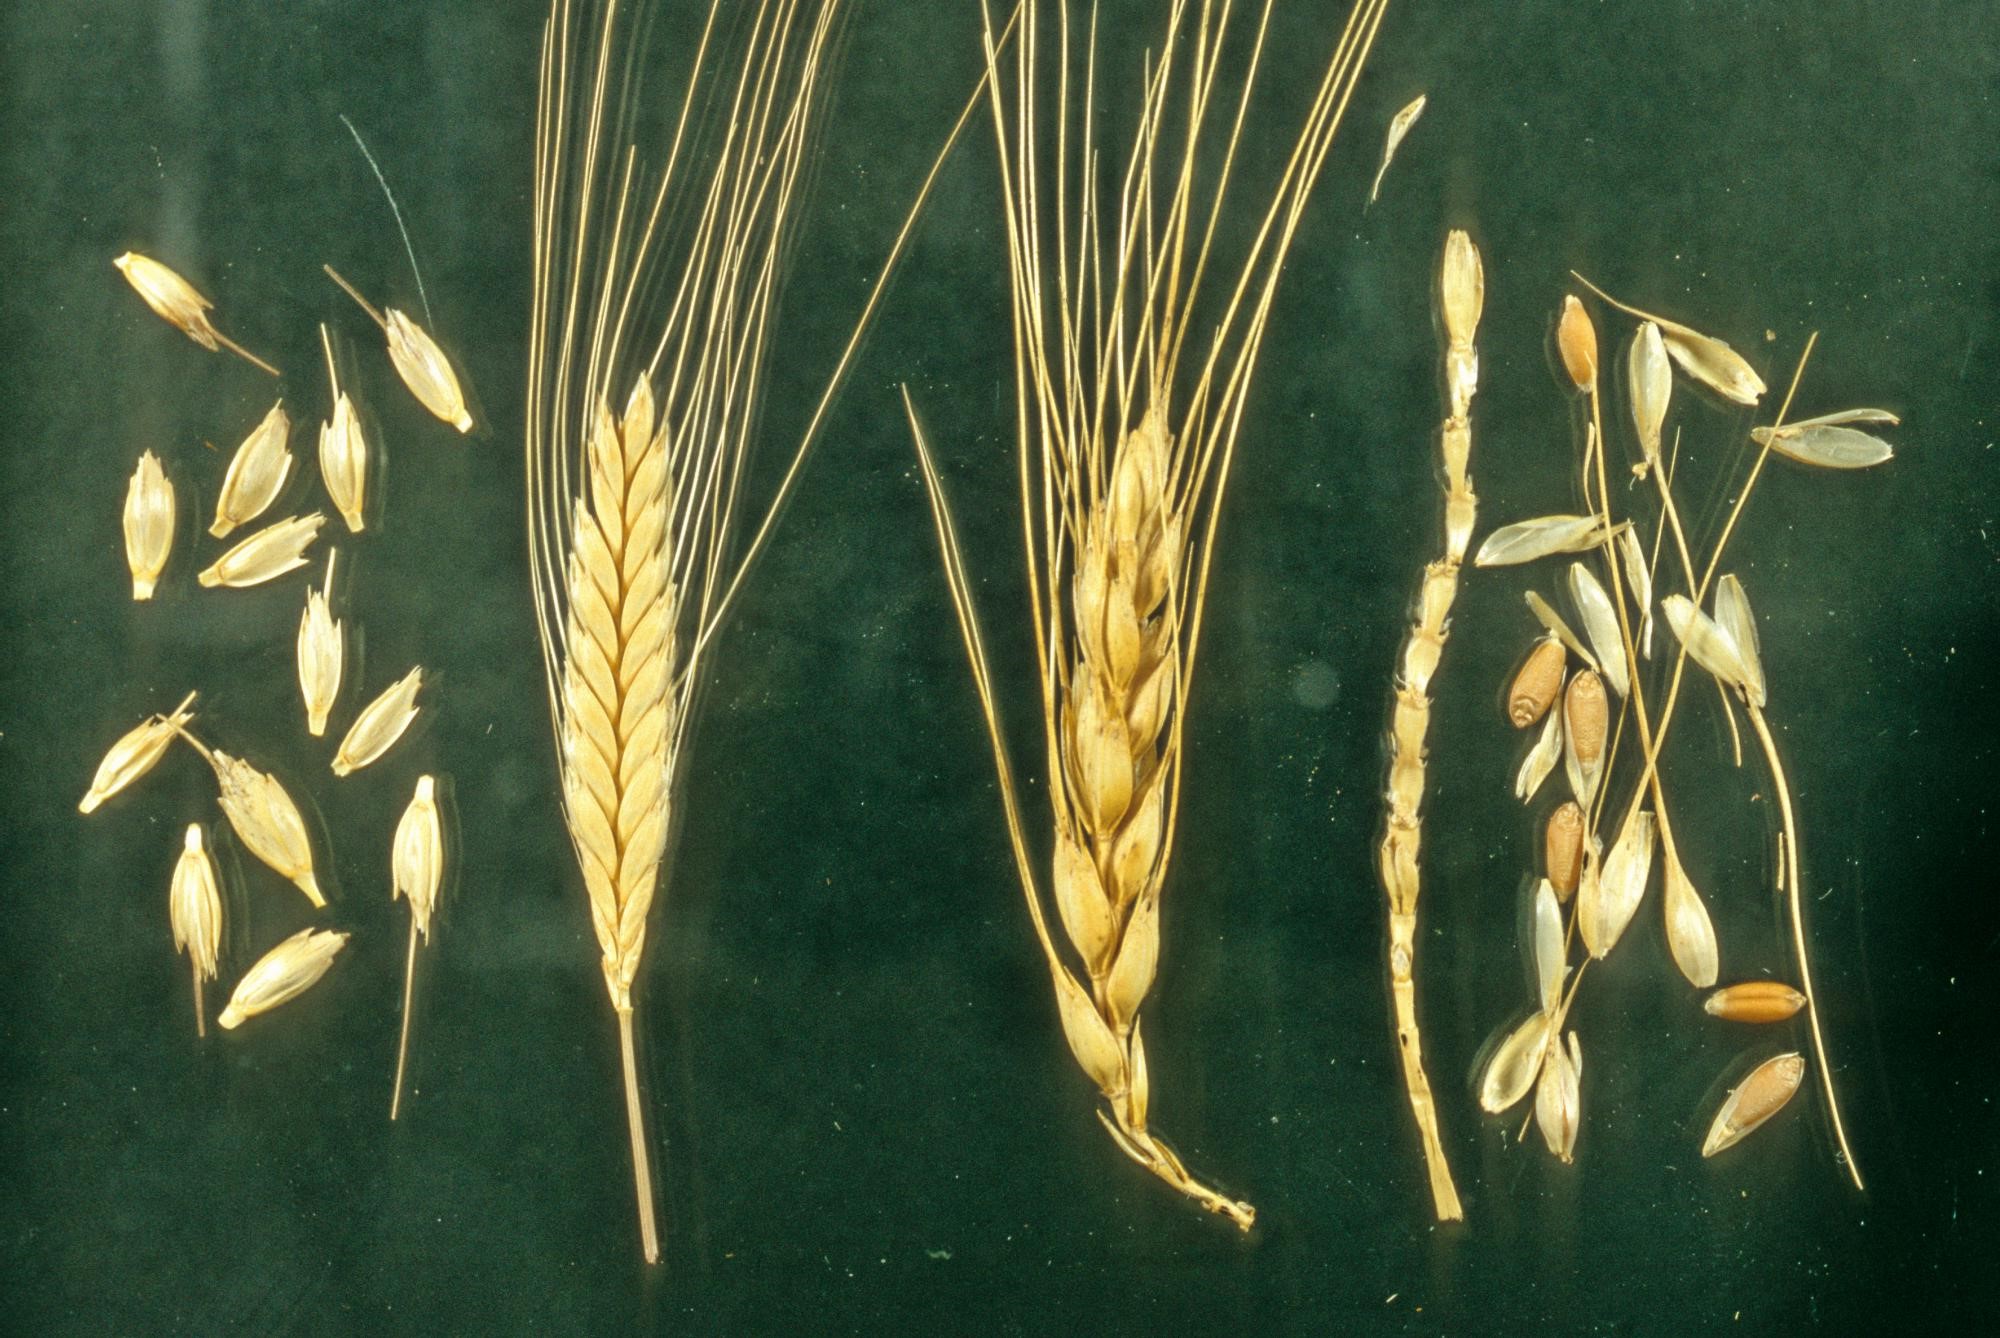 Hulled vs. free-threshing wheats. Left: Hulled wheat (einkorn) – the ear is enclosed by tough husks and breaks up into spikelets; Right: Free-threshing wheat (bread wheat), soft husks, so the ear breaks up into grain and chaff. Photo: Mark Nesbitt.